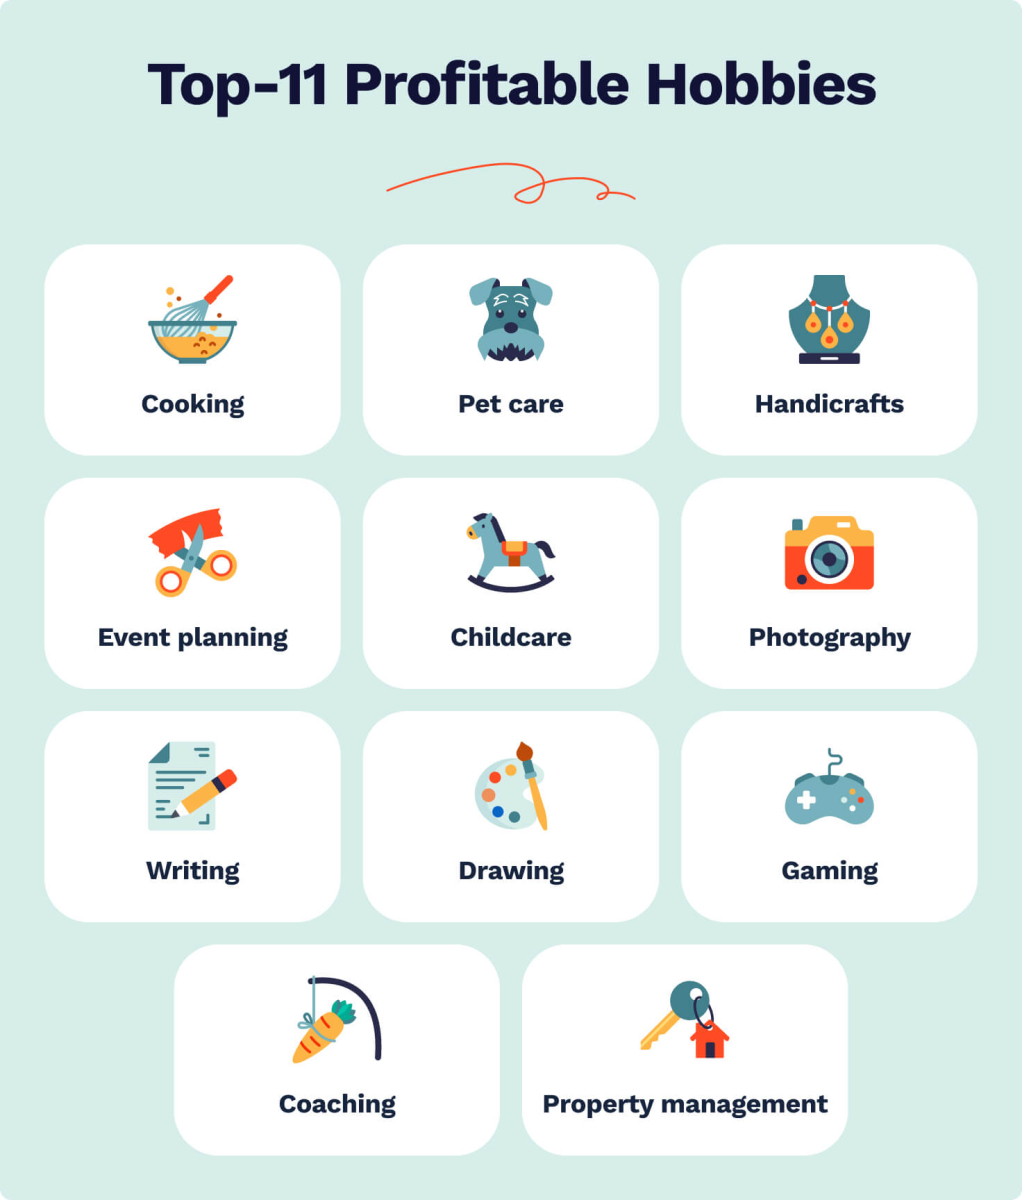 The picture lists 11 most profitable hobbies.